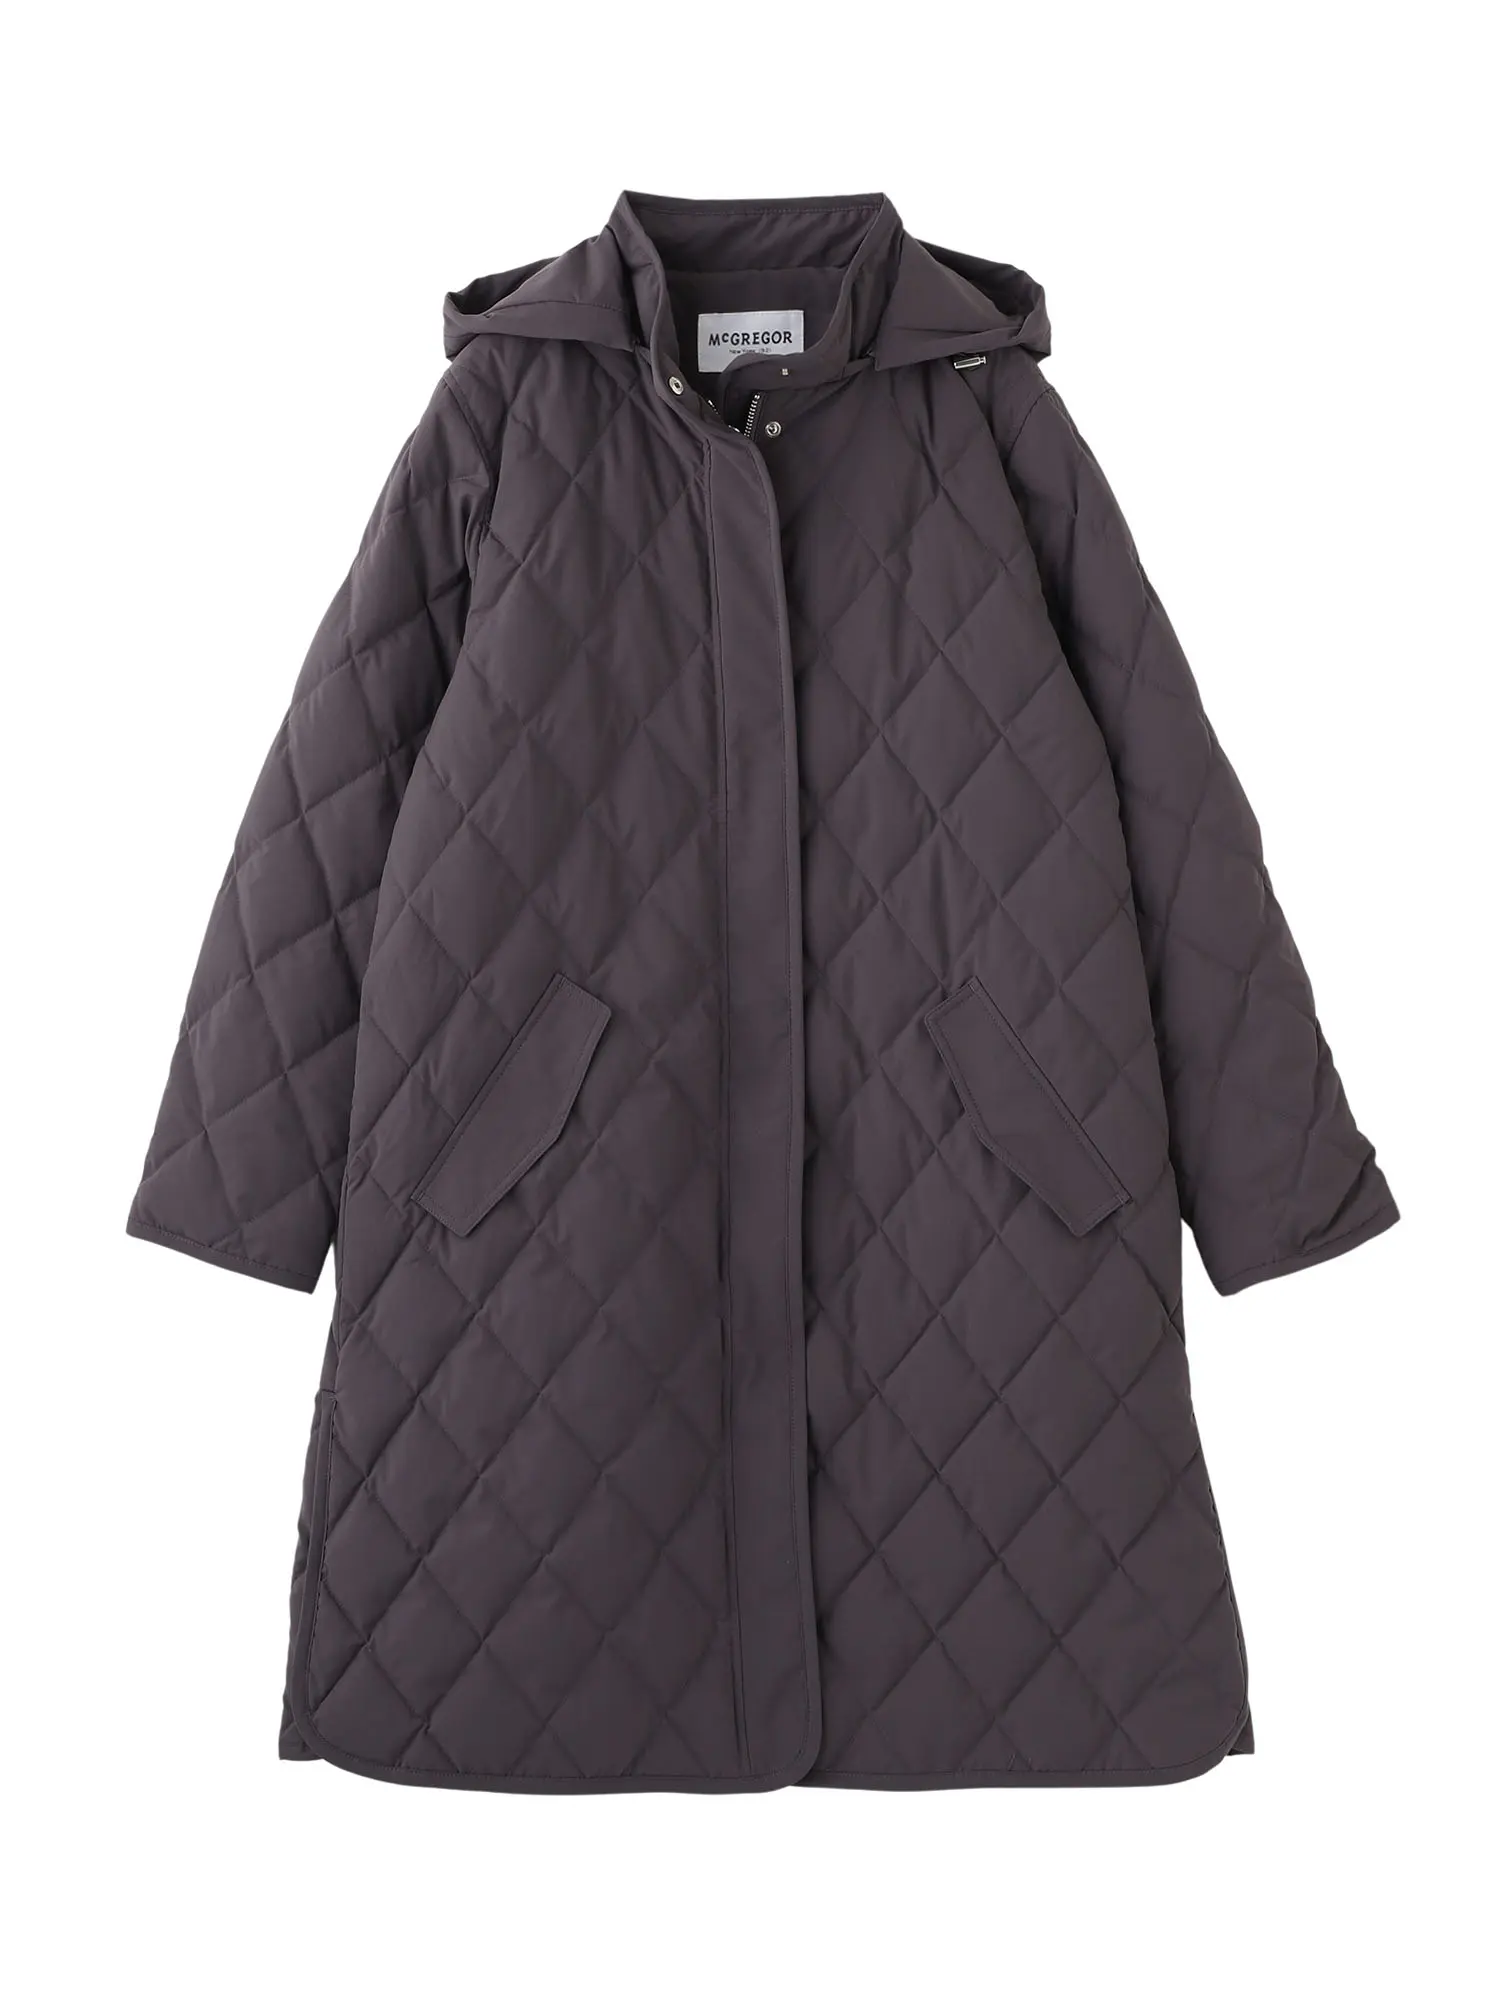 WOMENS-WINTER OUTER COLLECTION - McGREGOR | マックレガー公式サイト